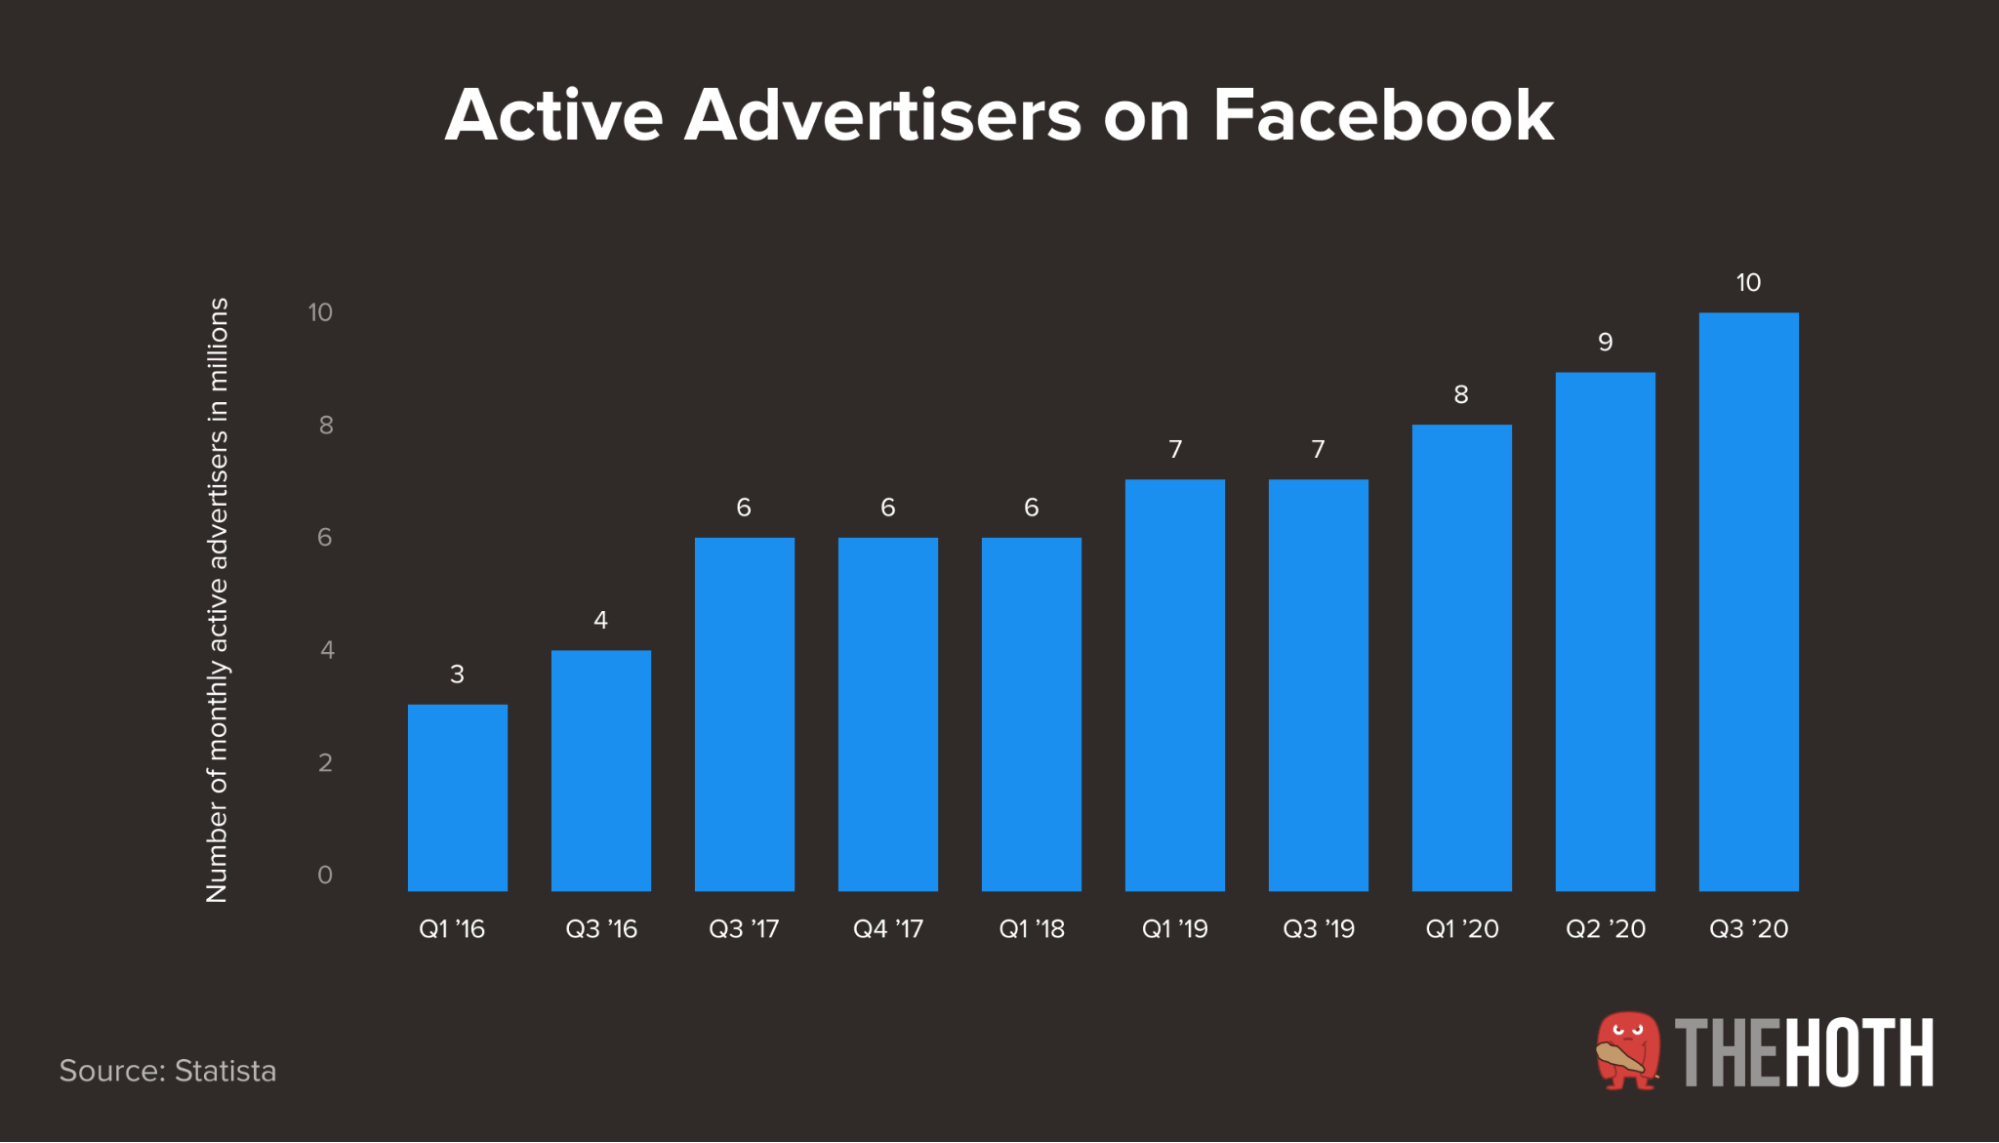 Number of active advertisers on Facebook